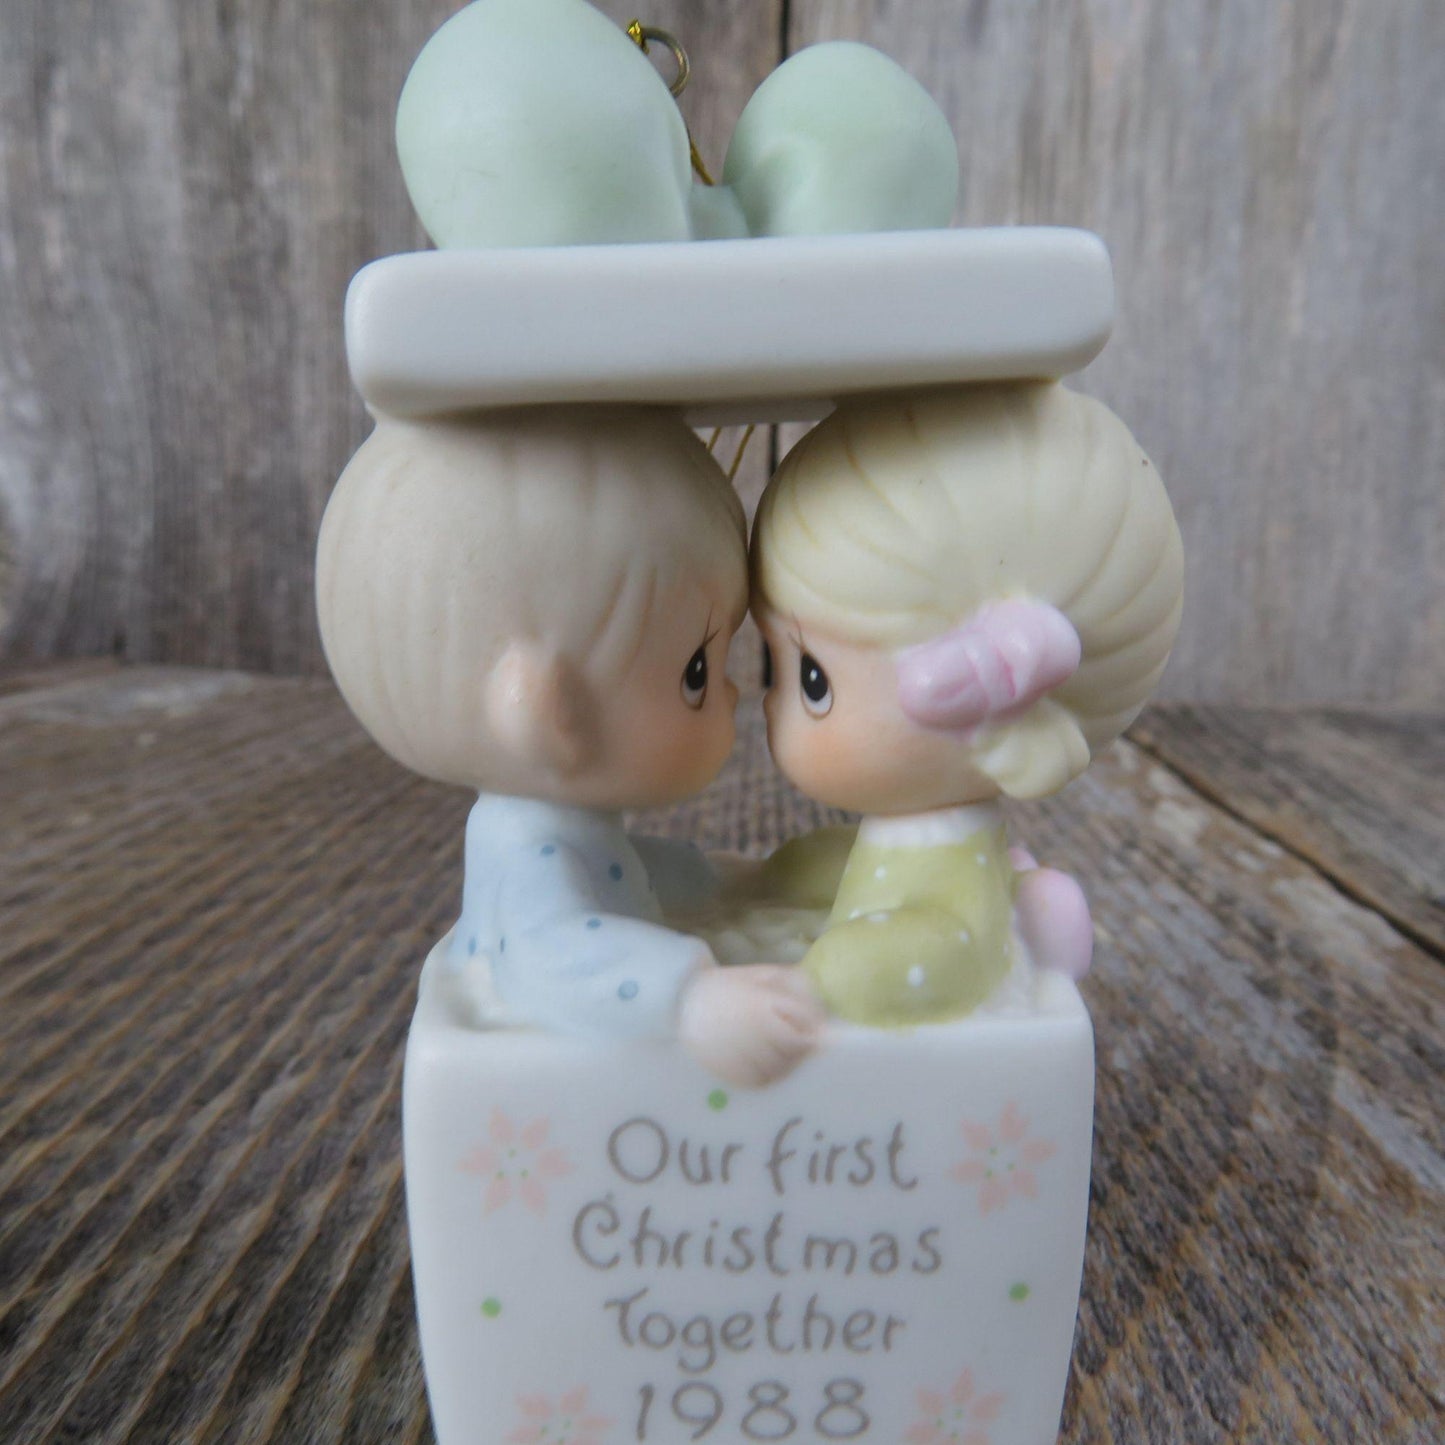 Vintage Our First Christmas Ornament Precious Moments Gift Box Couple Holiday Enesco 1988